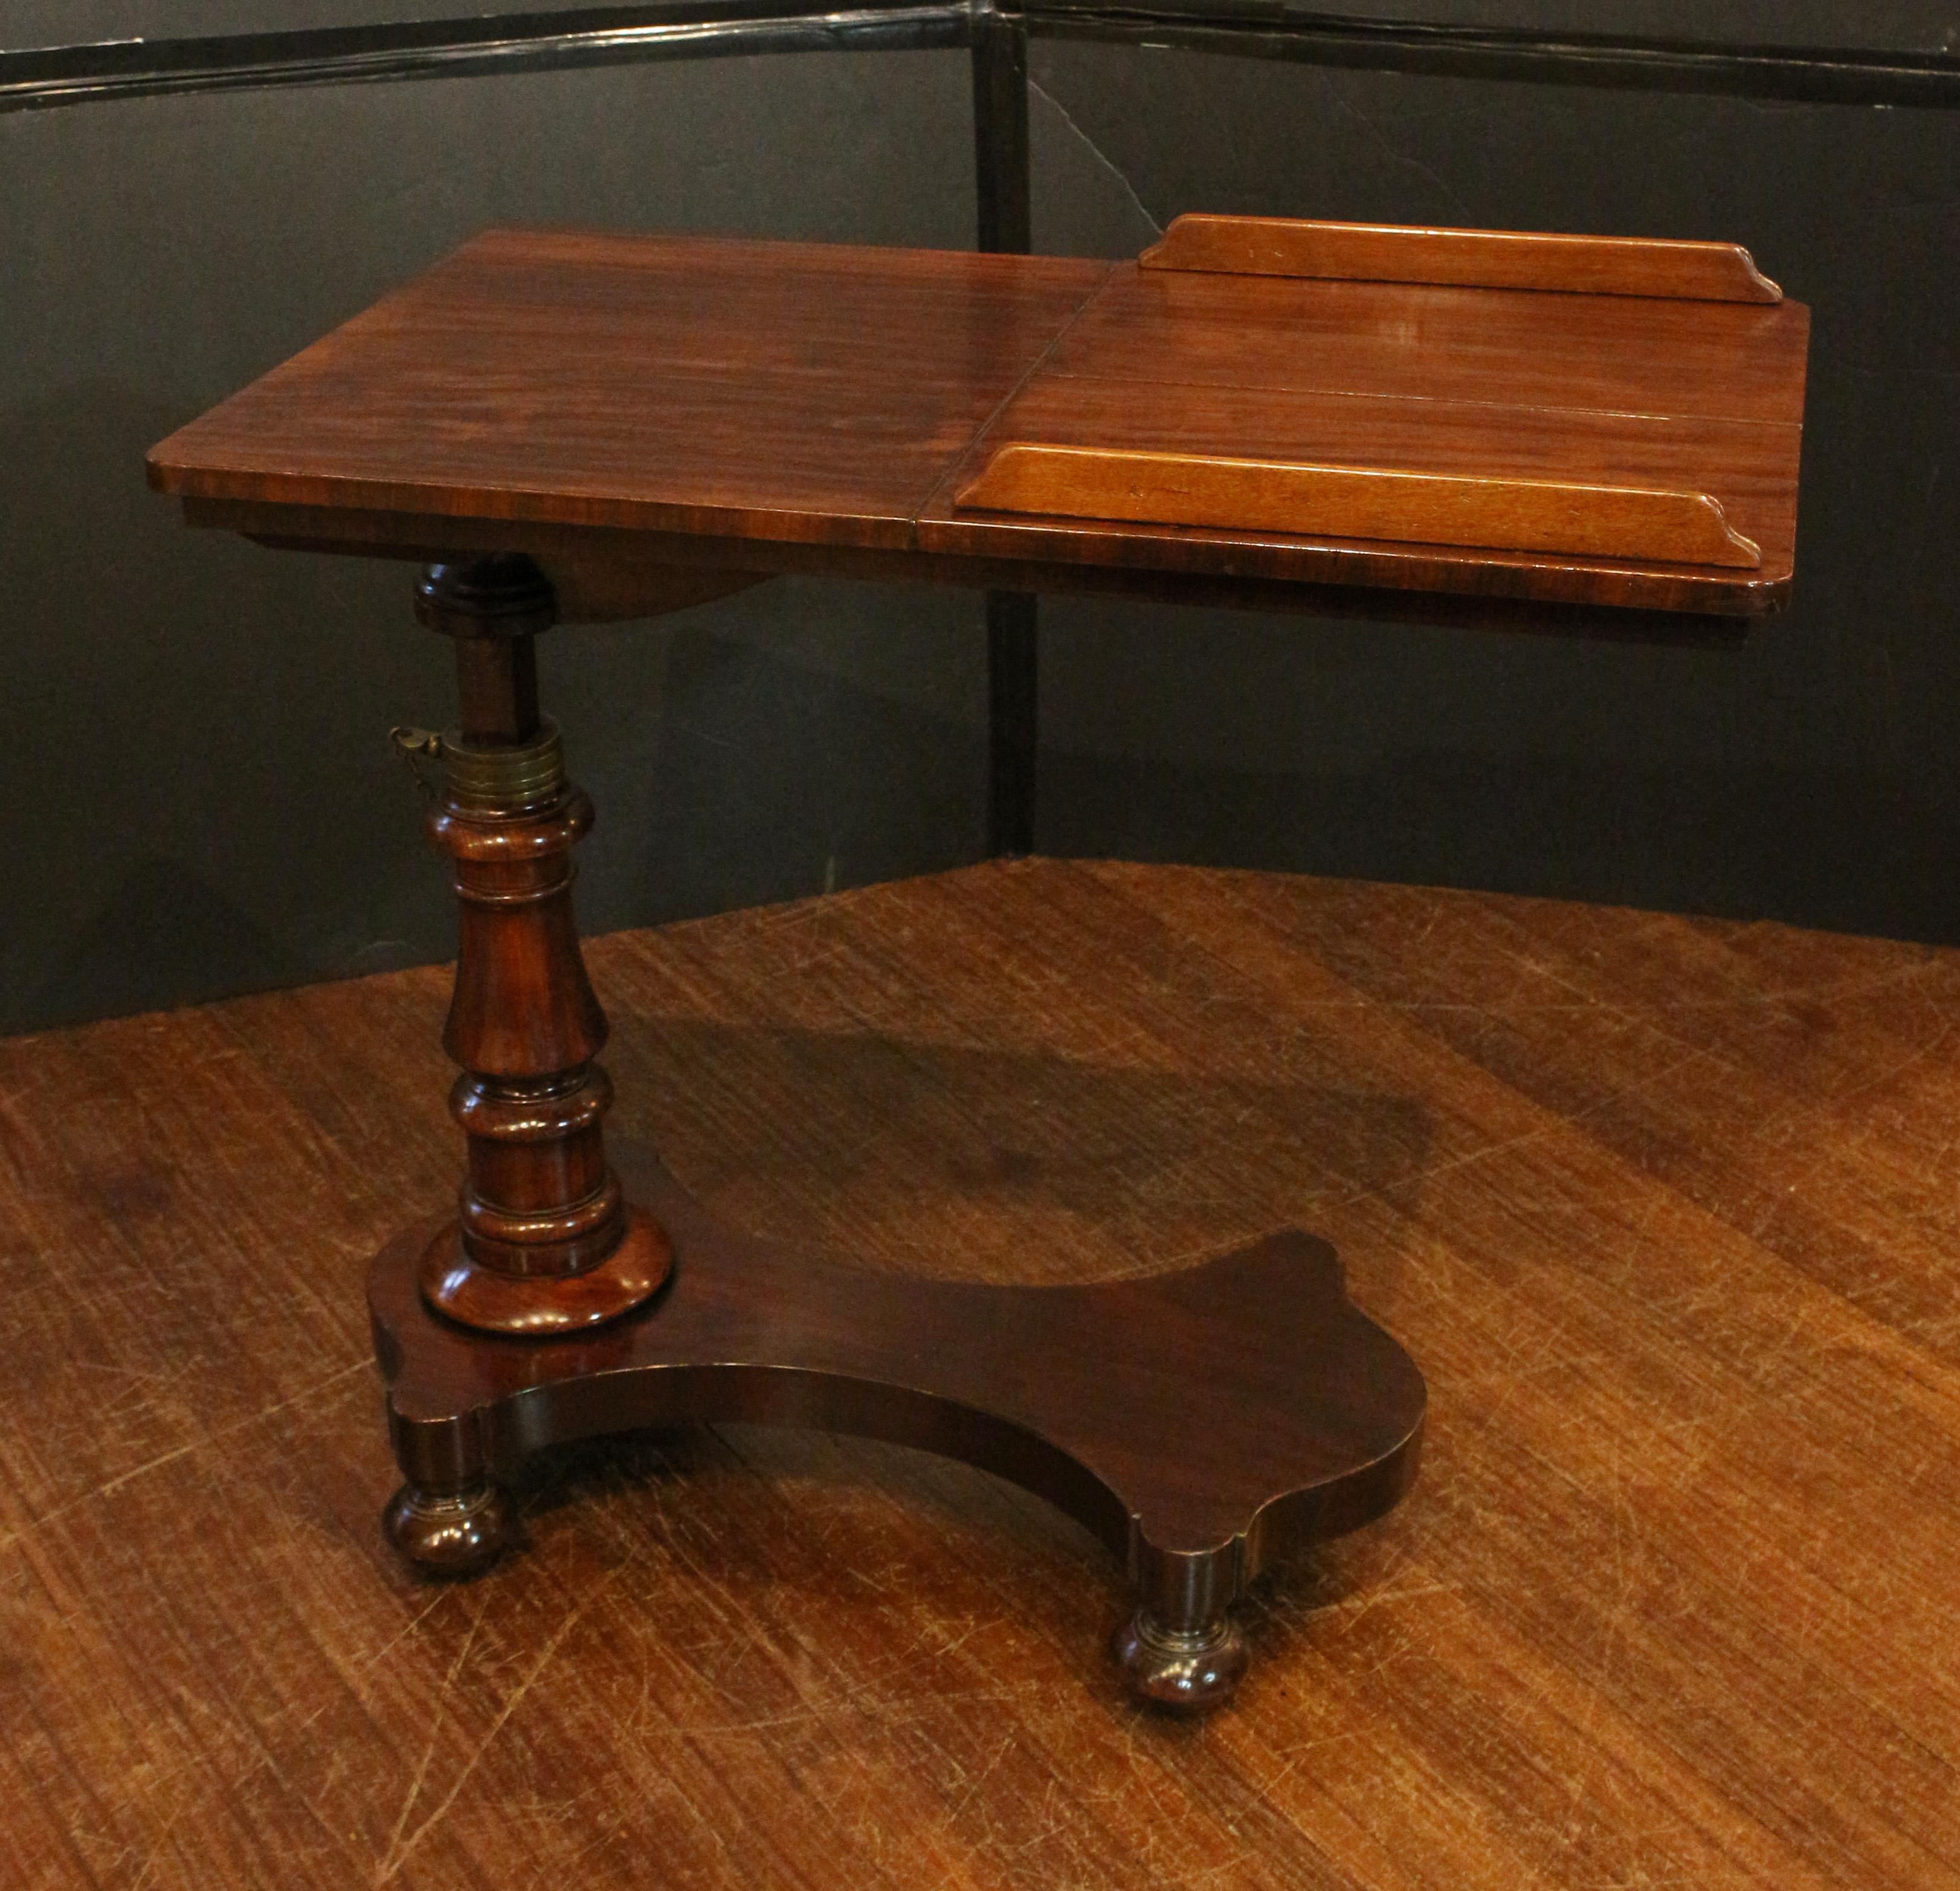 Circa 1860 adjustable height double sided reading table, English. Well figured mahogany. Nicely shaped base with four flattened bun feet. Bold turned column with brass collar and adjusting support & markers. Double sided adjustable angle reading